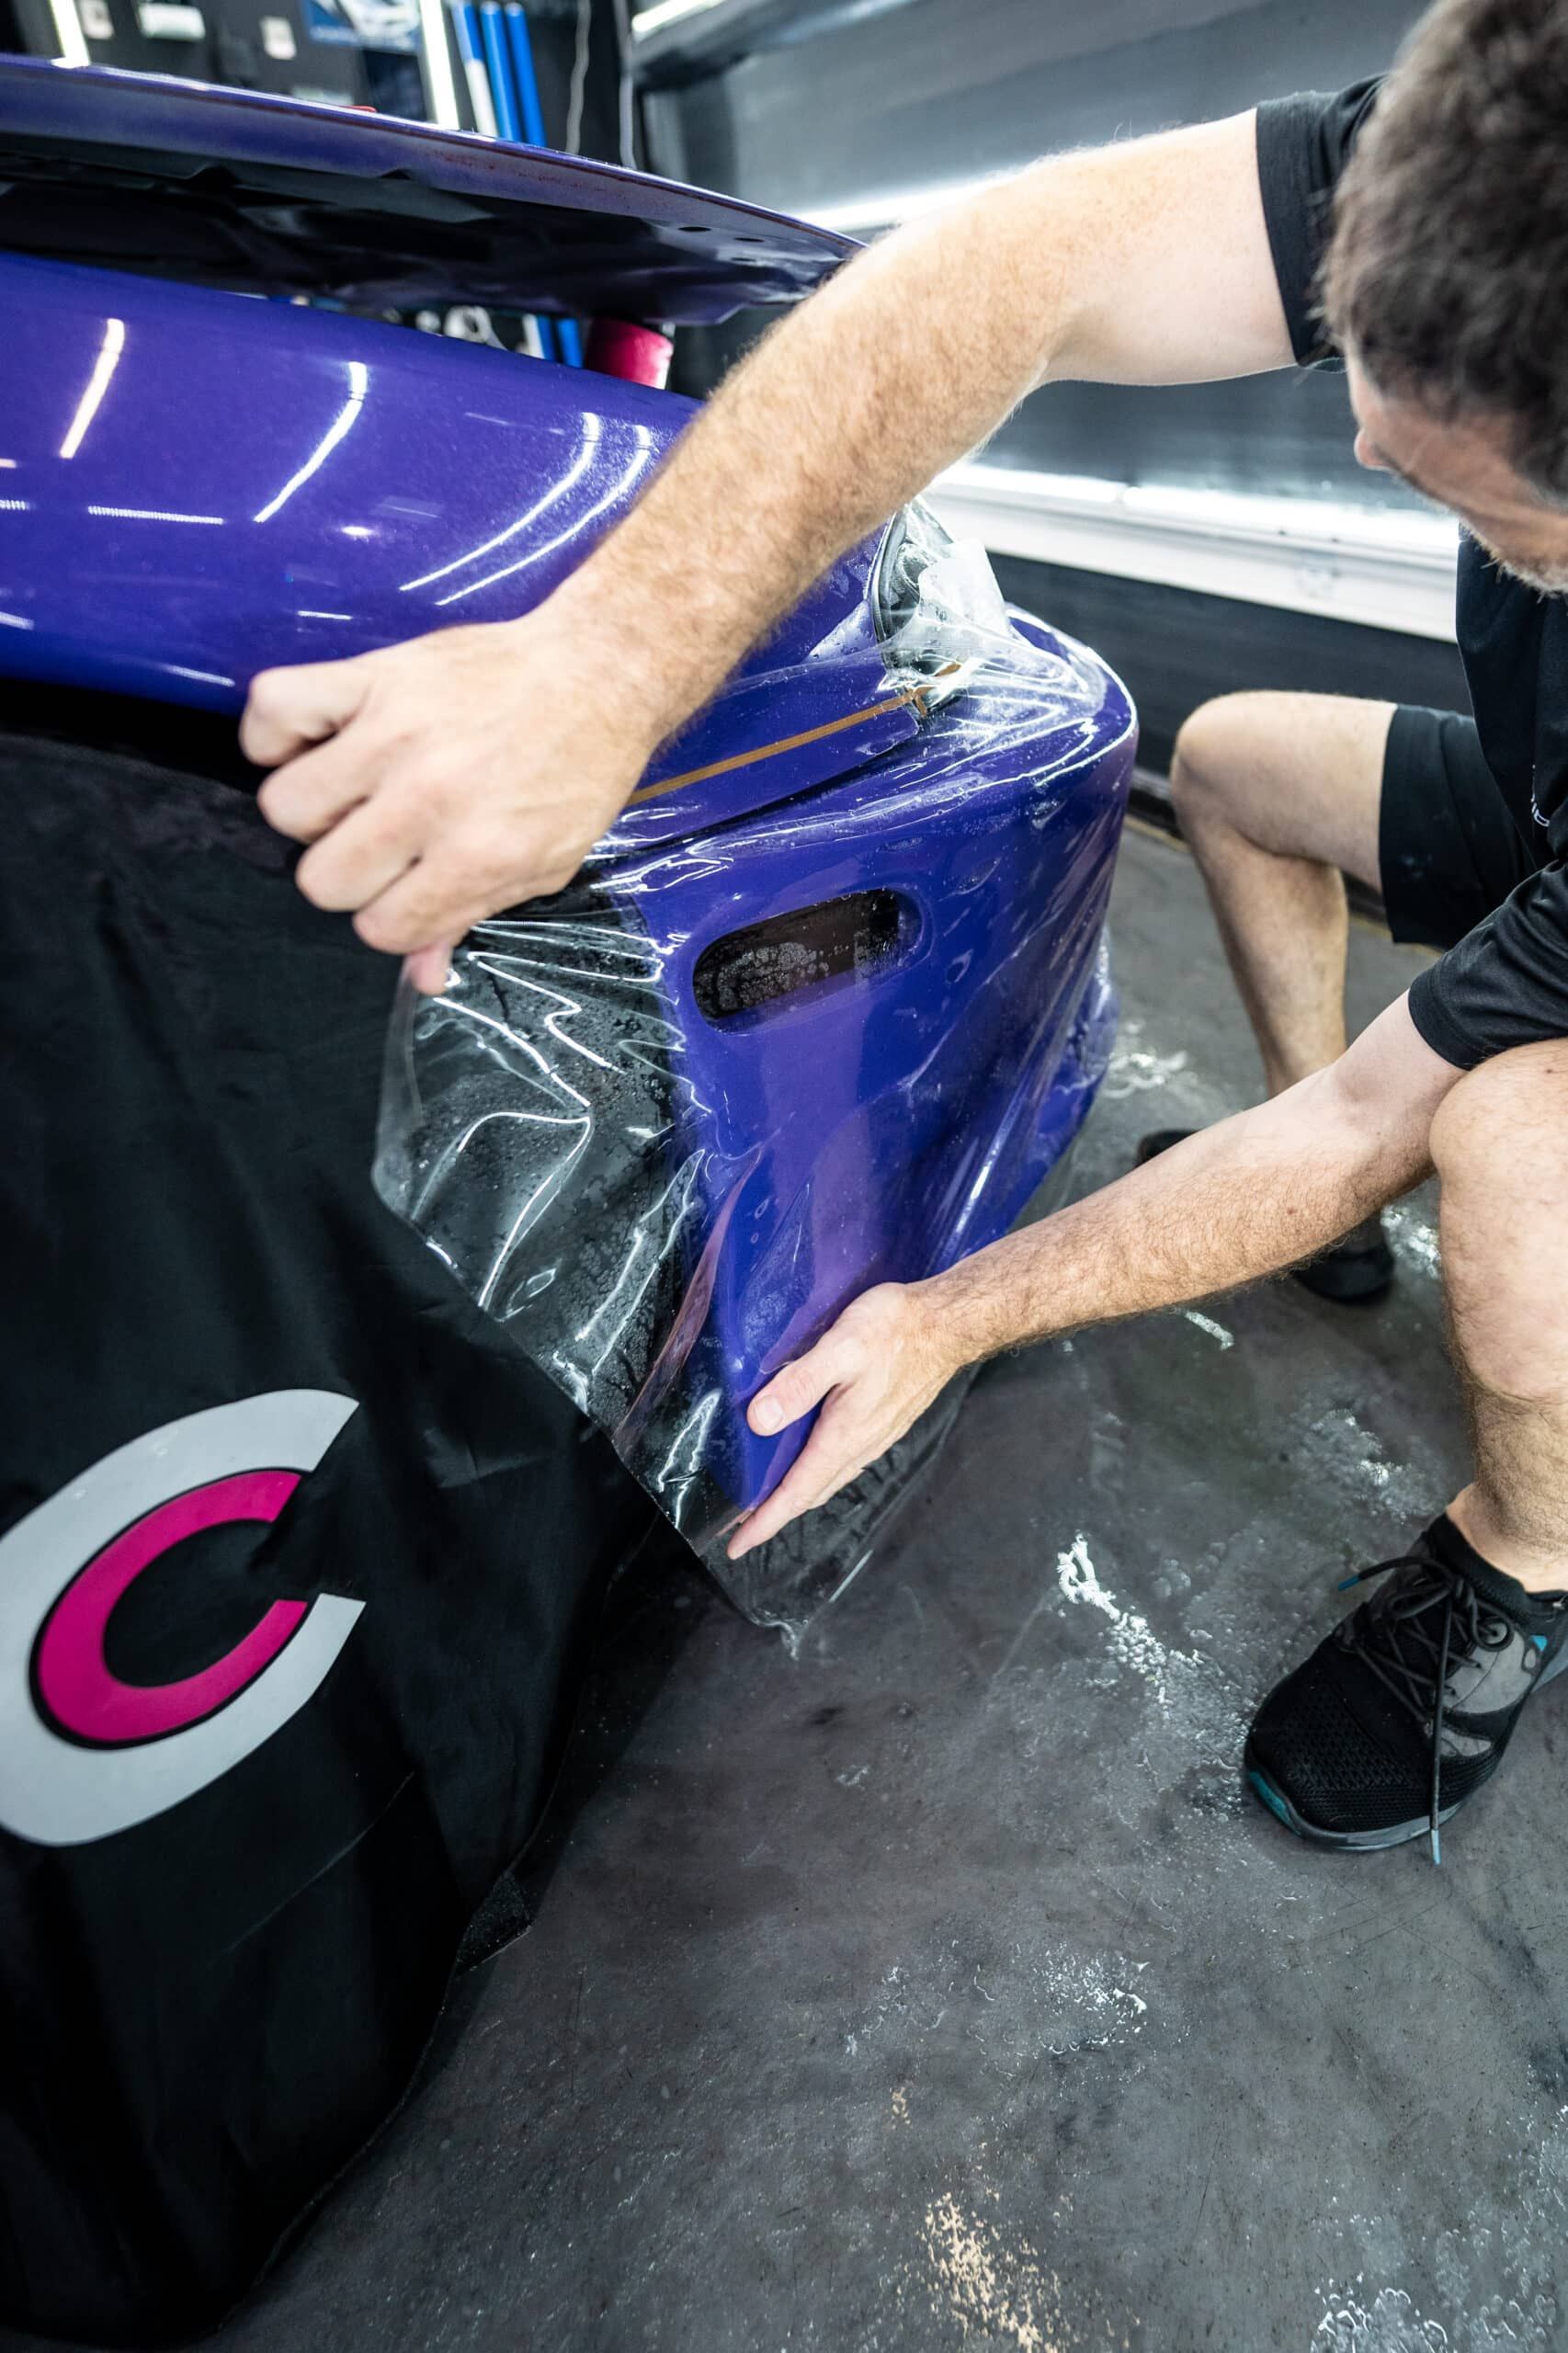 A man is wrapping a purple car with plastic wrap.